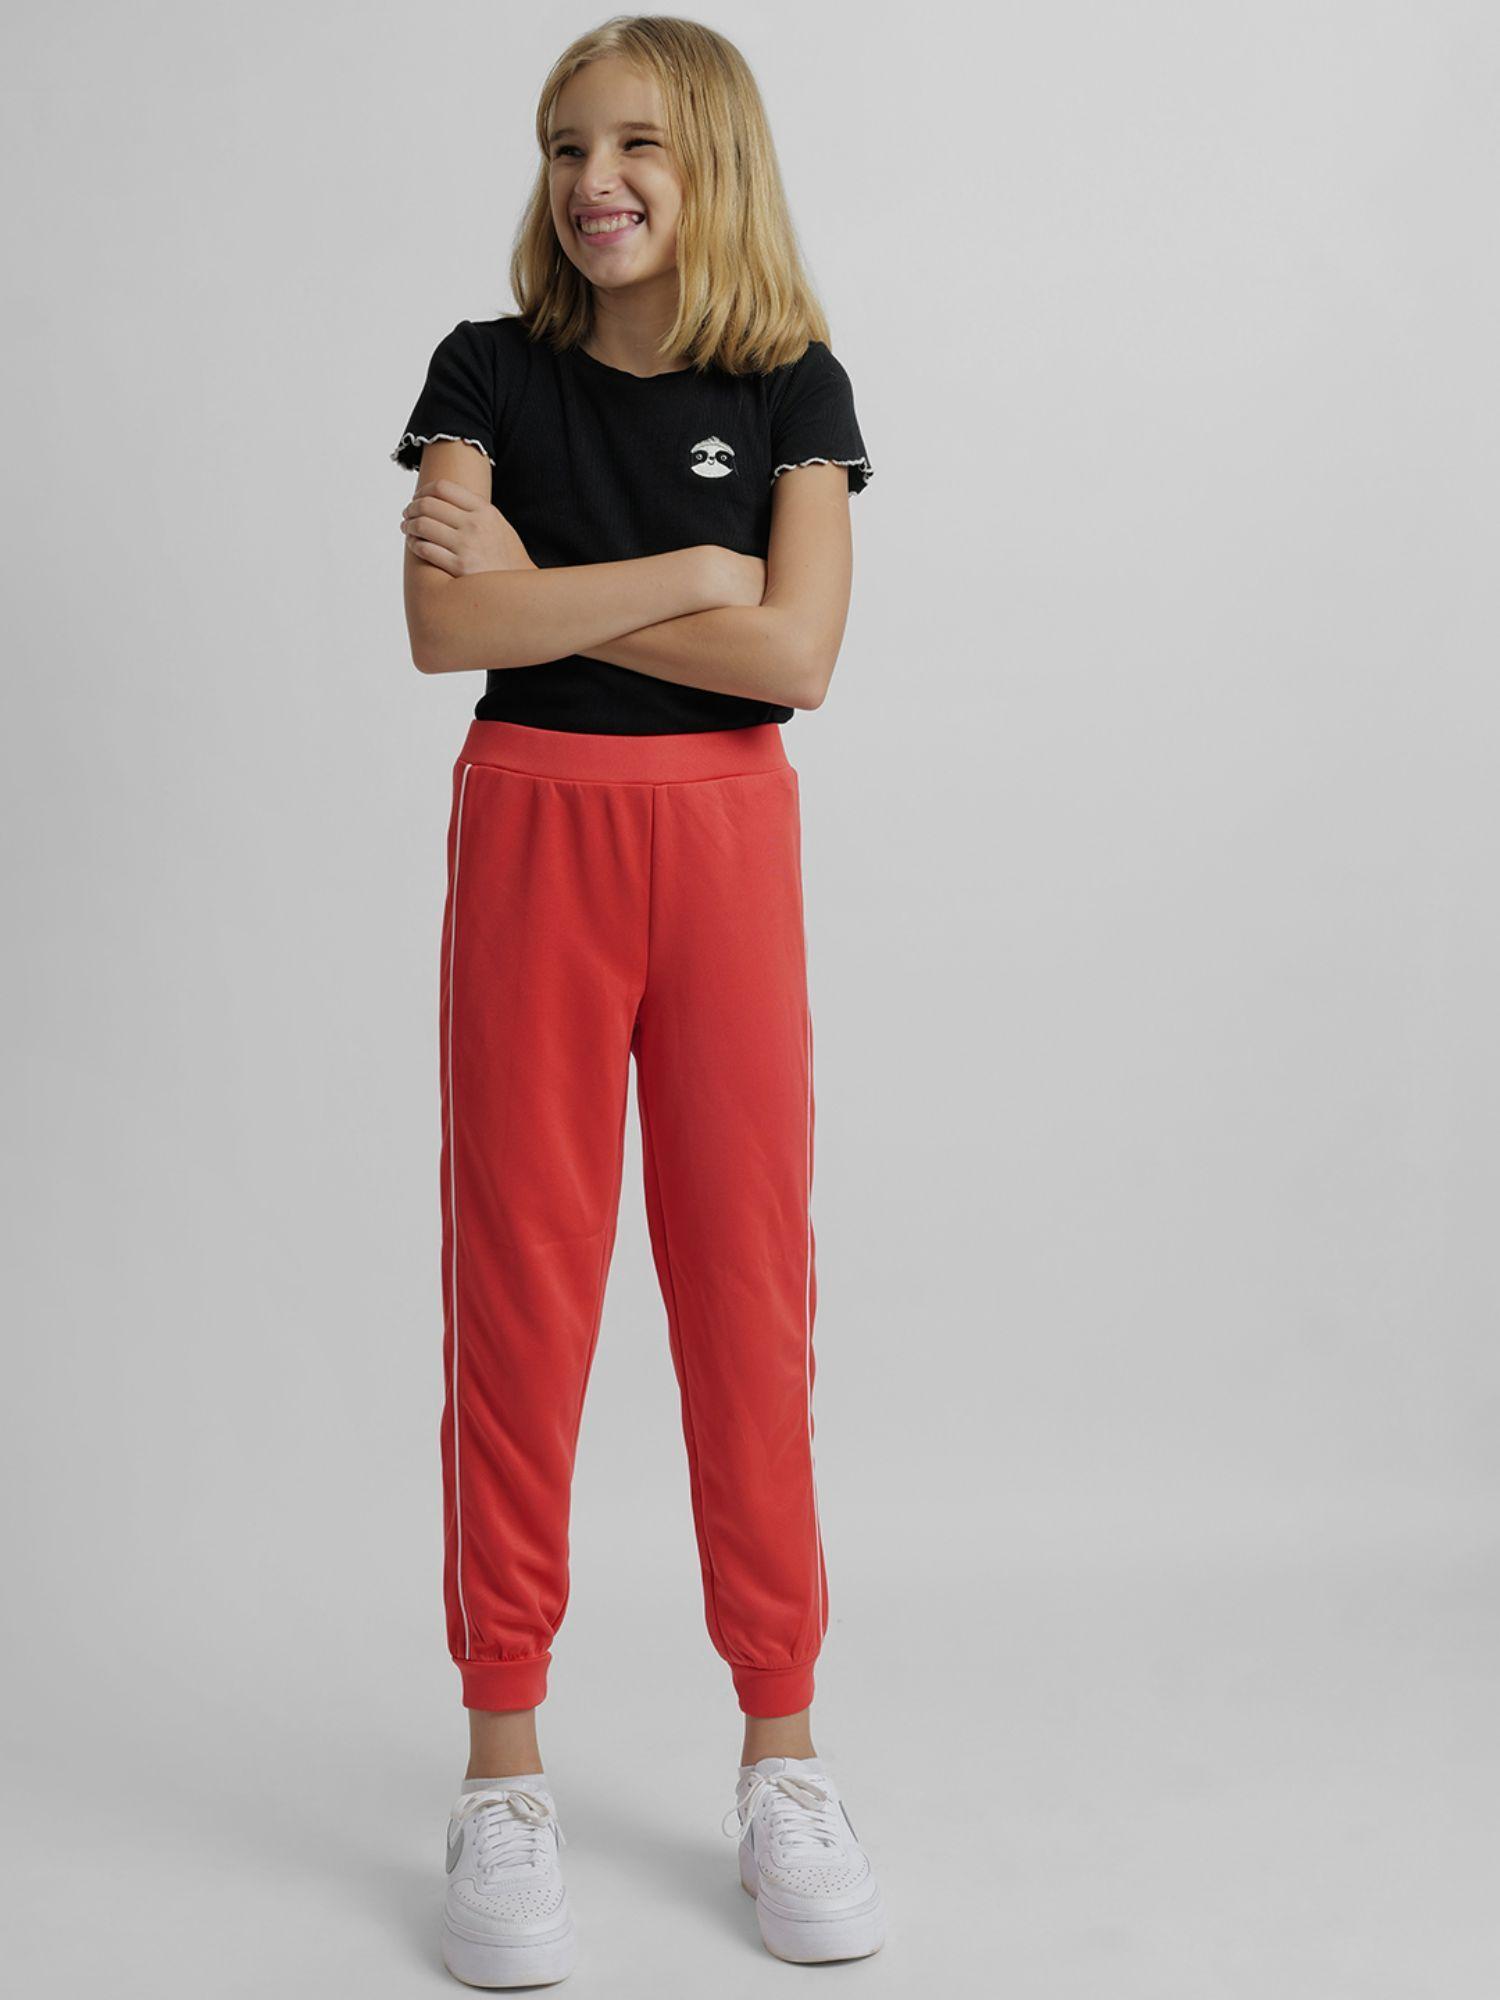 girls striped red track pant